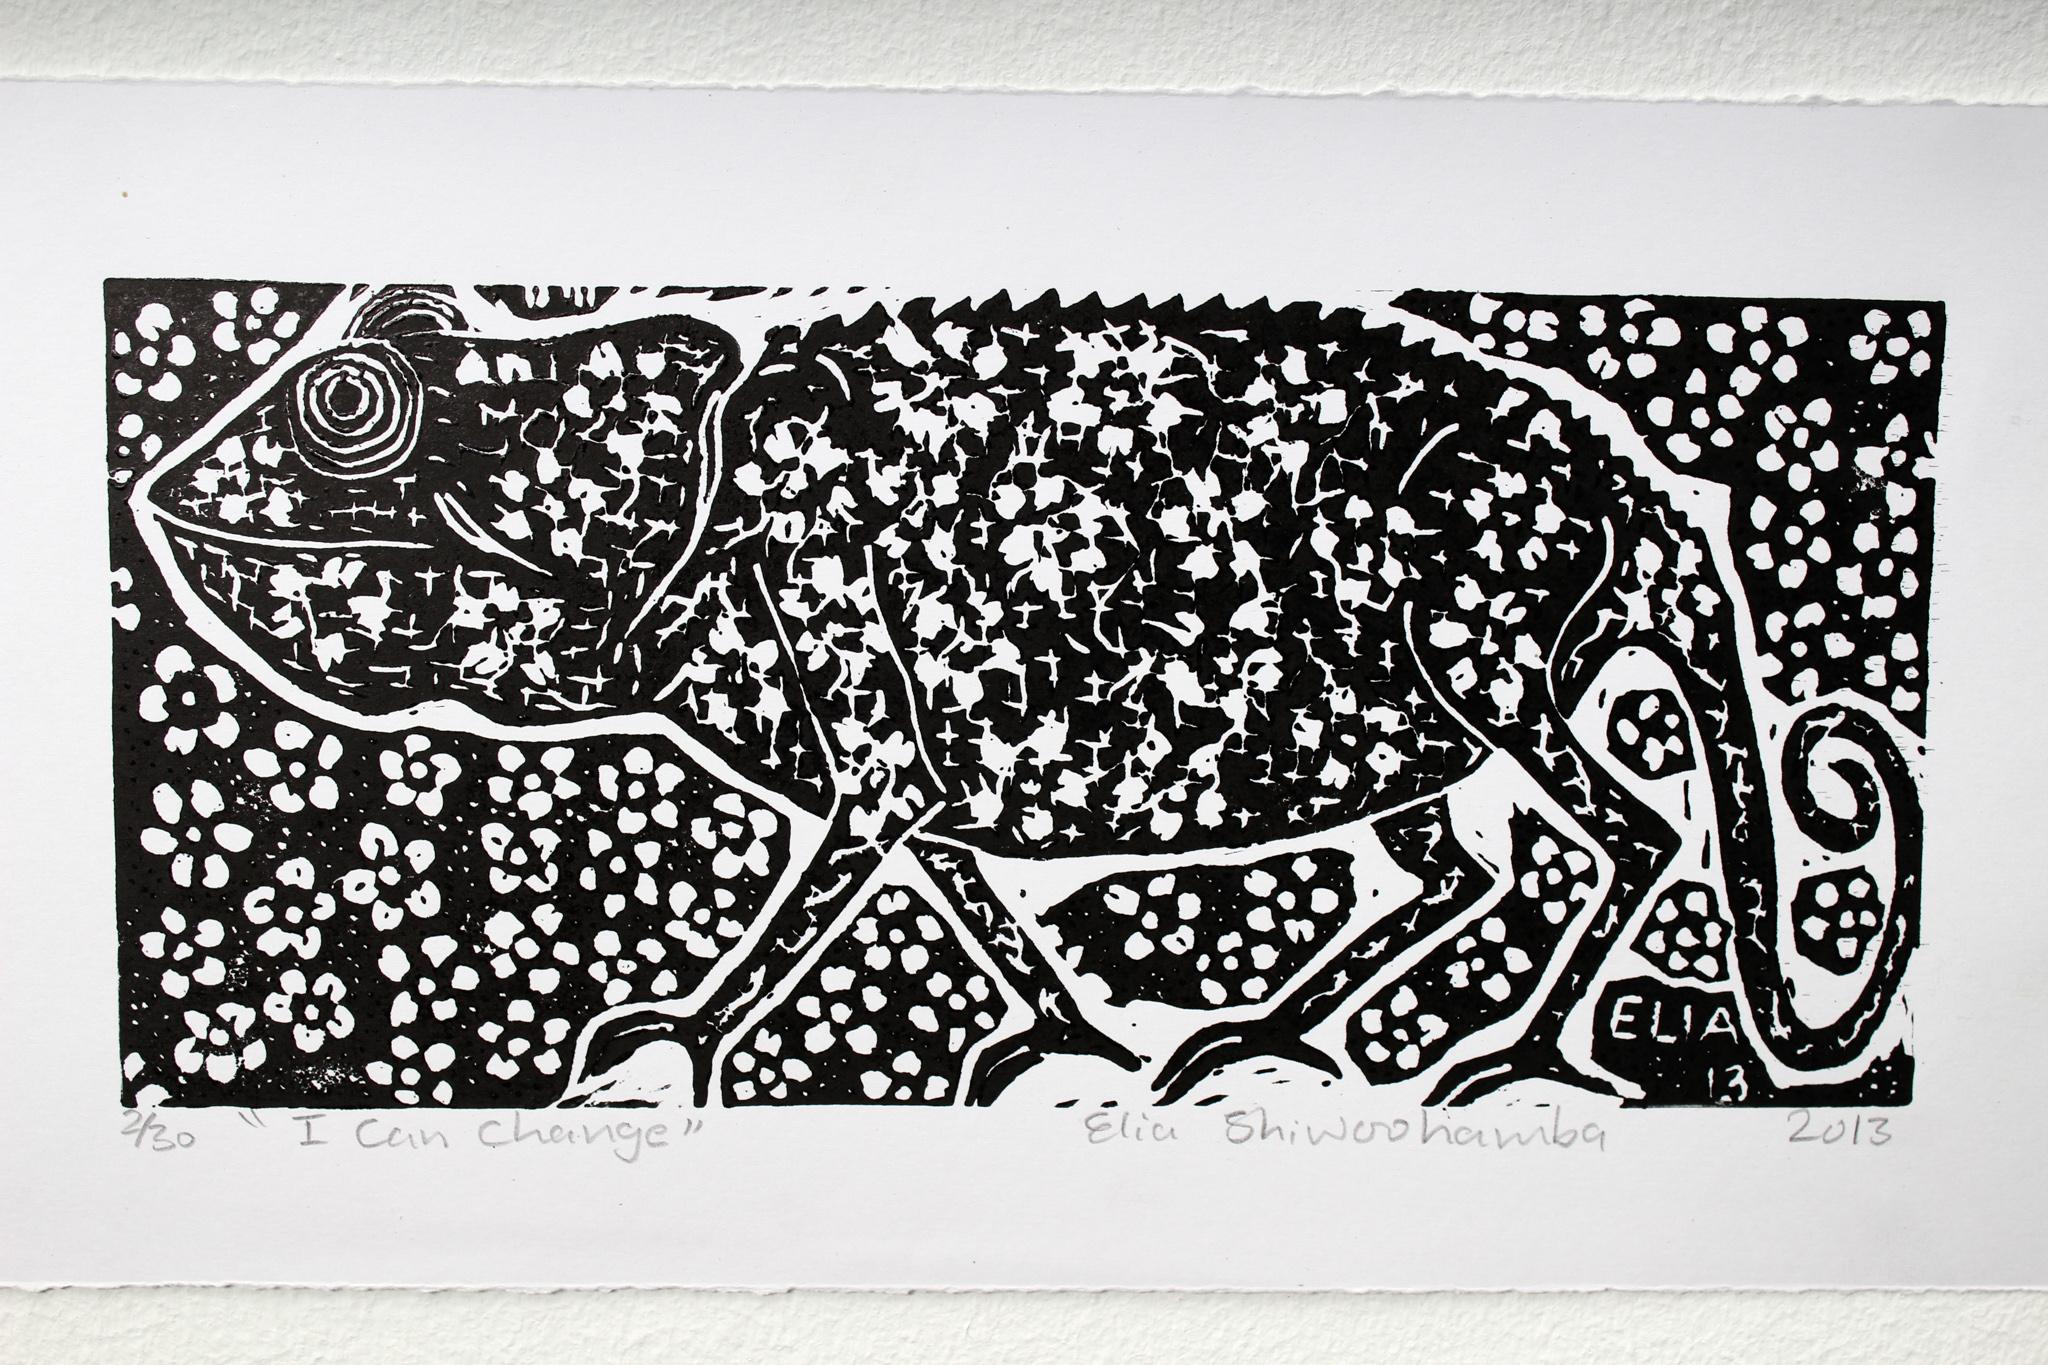 I can change, 2013. Linoleum block print on paper. Edition of 30. 

Elia Shiwoohamba was born in 1981 in Windhoek, Namibia. He graduated from the John Muafangejo Art Centre in Windhoek in 2006. Specialising in printmaking and sculpture, Shiwoohamba